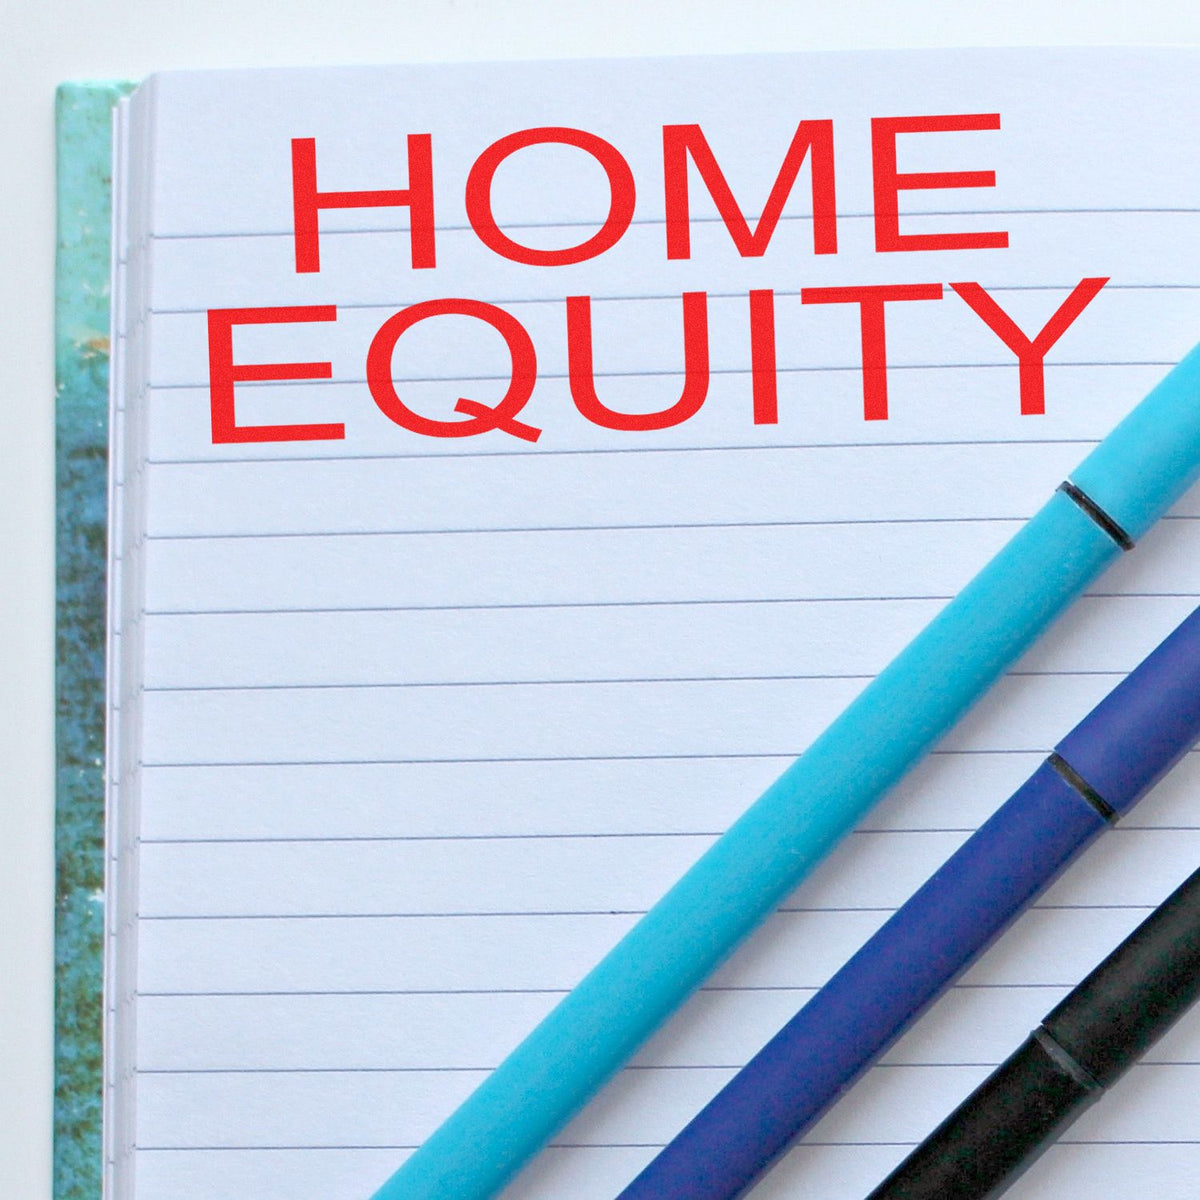 Home Equity Rubber Stamp In Use Photo